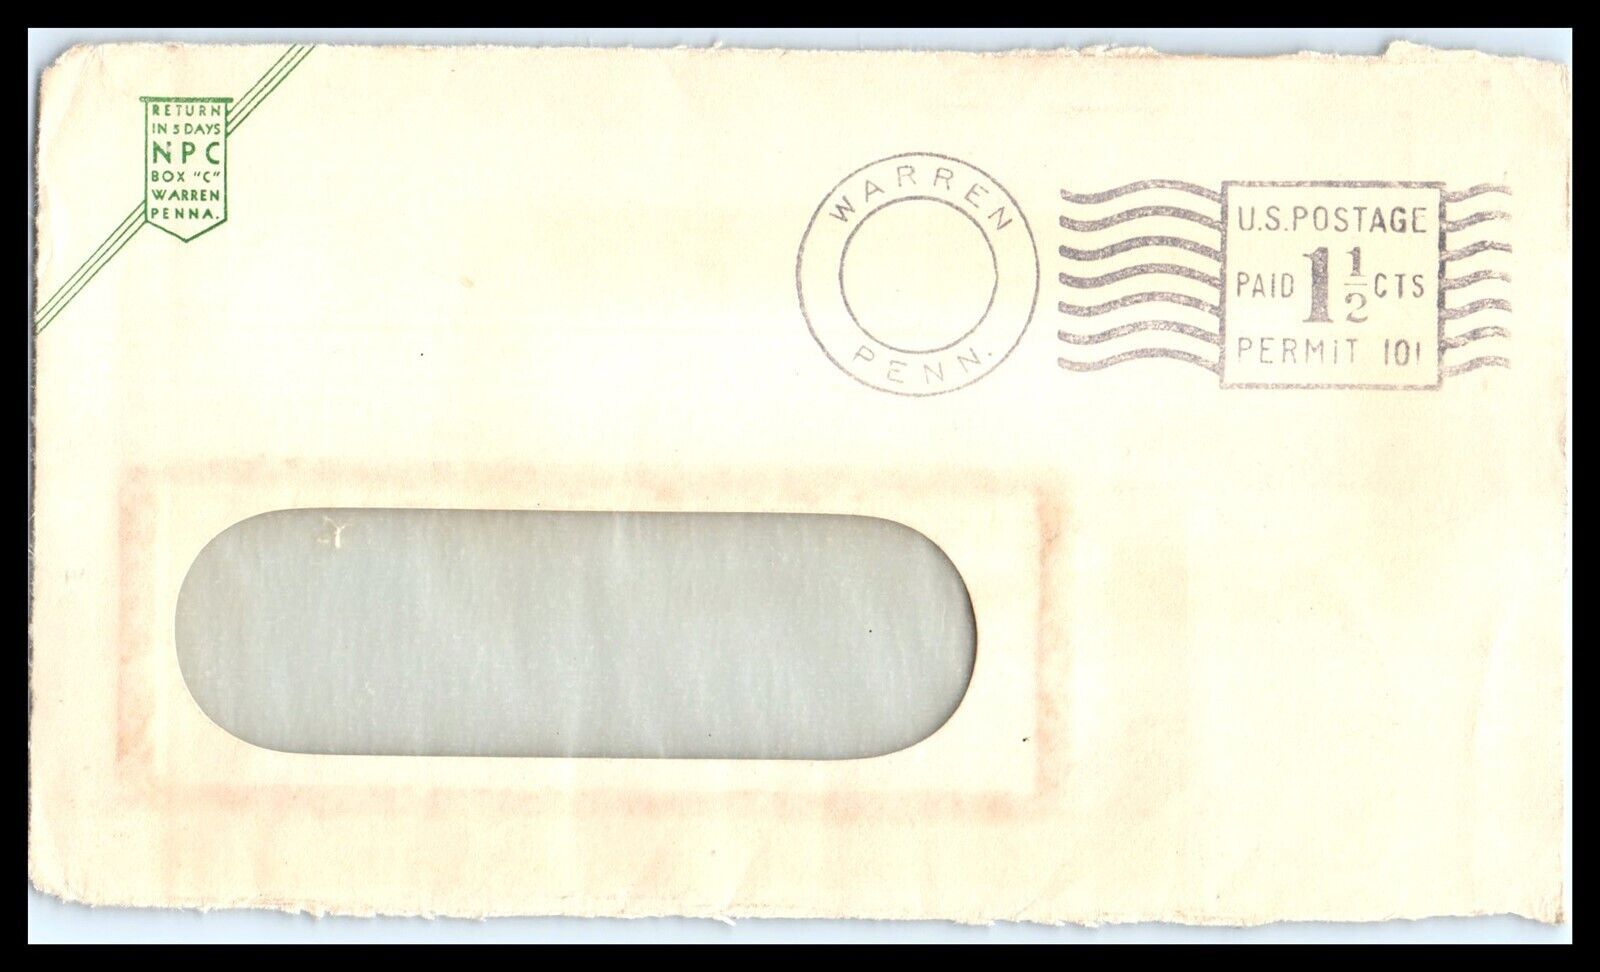 Primary image for PENNSYLVANIA Cover (FRONT ONLY) - NPC, Warren L11